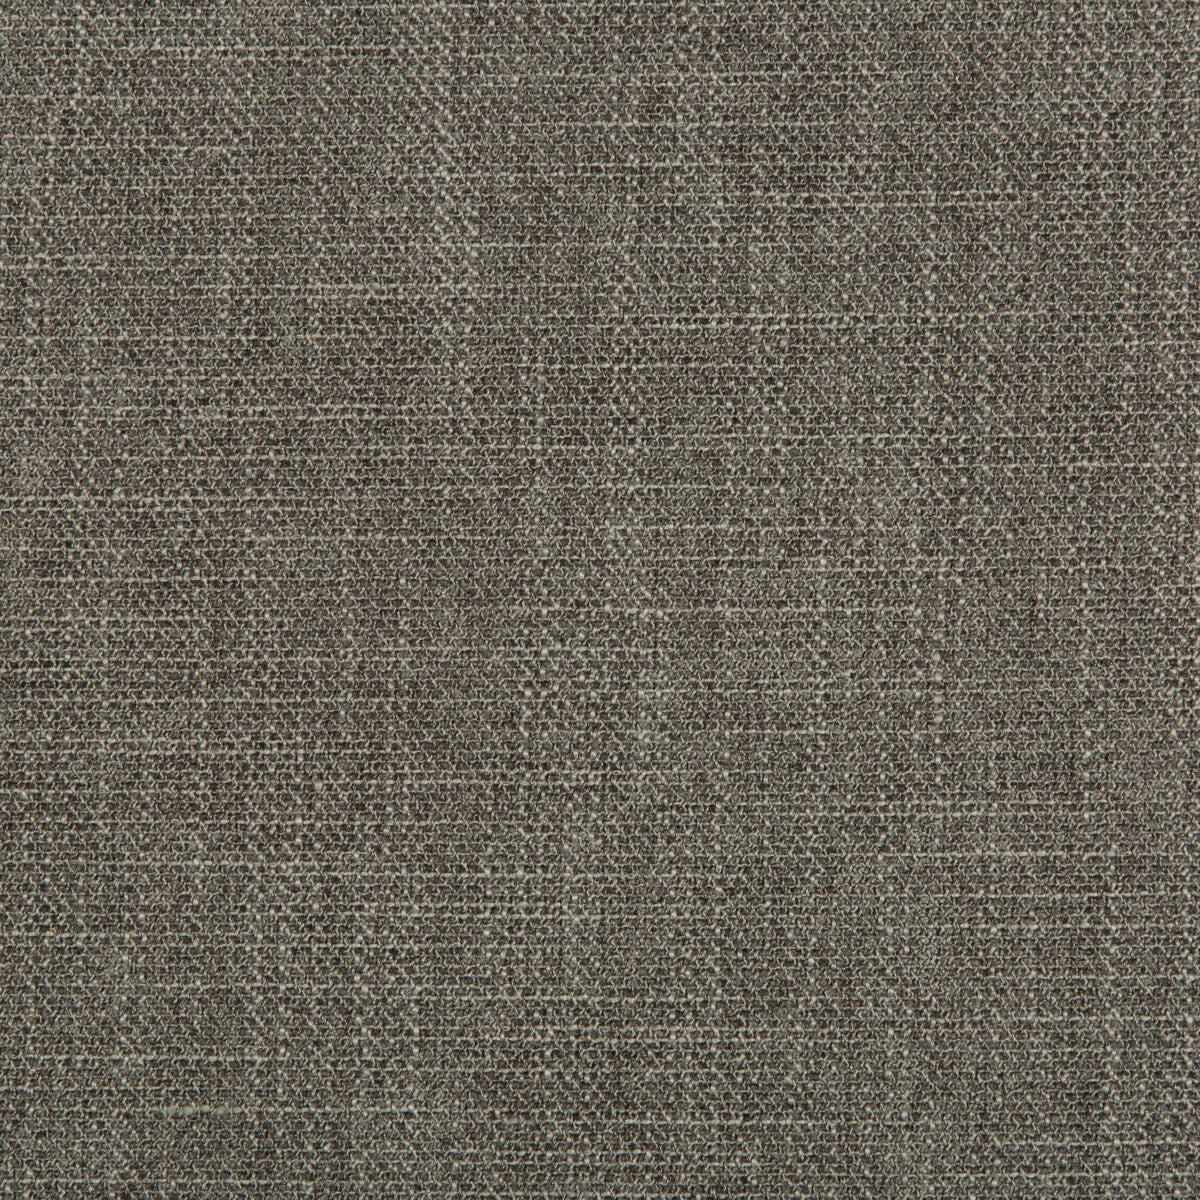 Kf Smt fabric - pattern 35390.21.0 - by Kravet Smart in the Performance Crypton Home collection